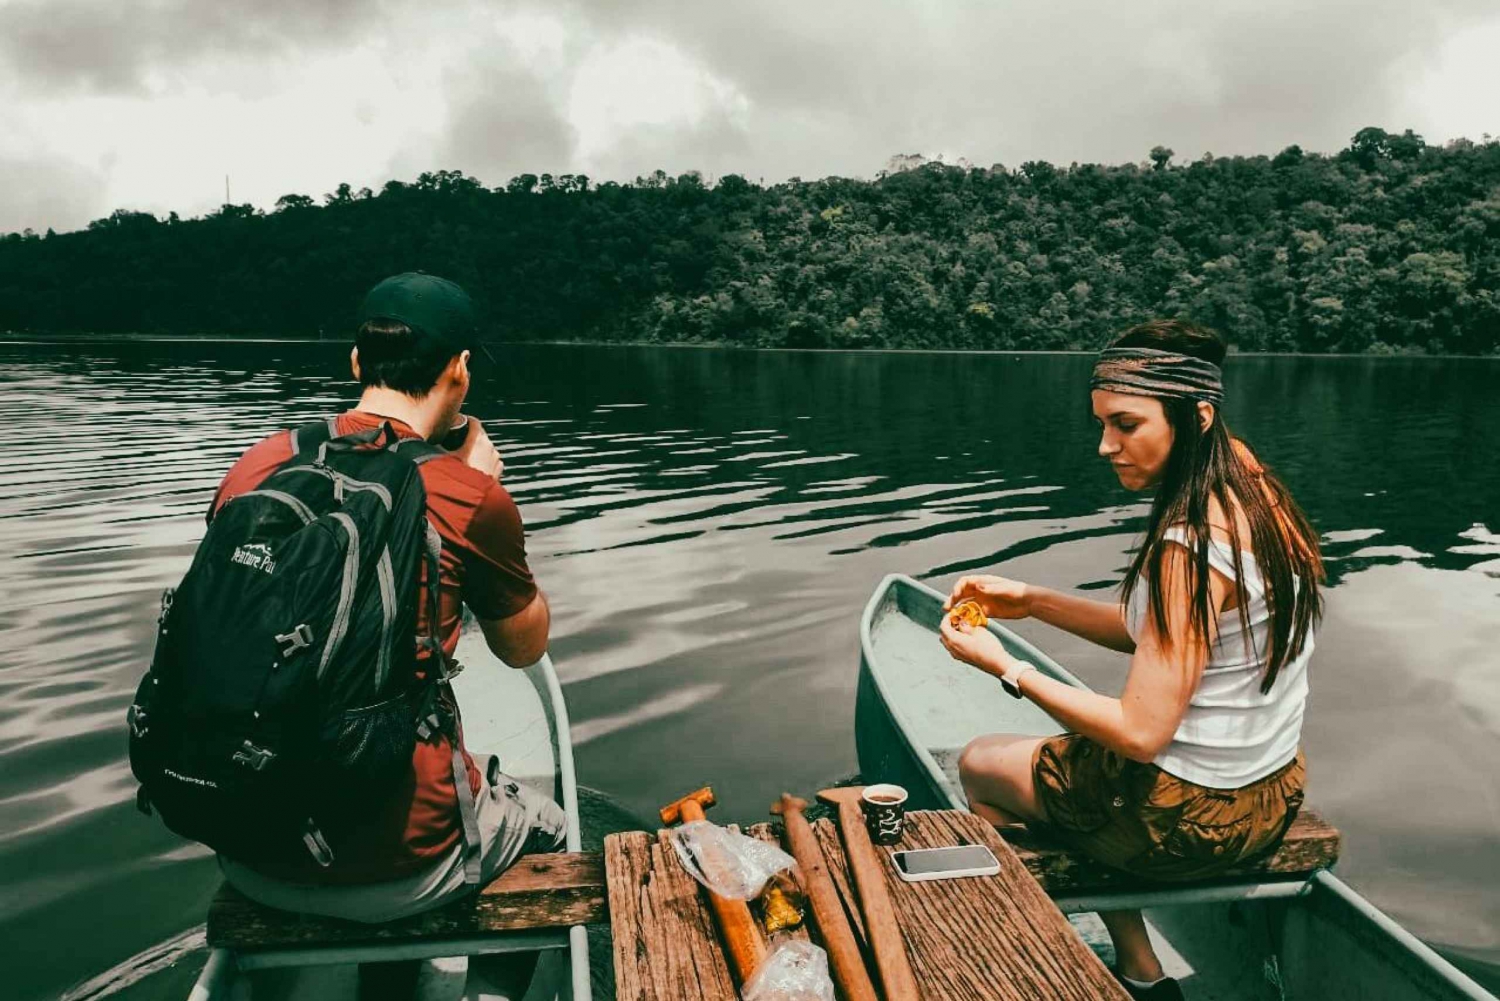 Munduk: Canoeing in the Lake and Discovering a Secret Temple